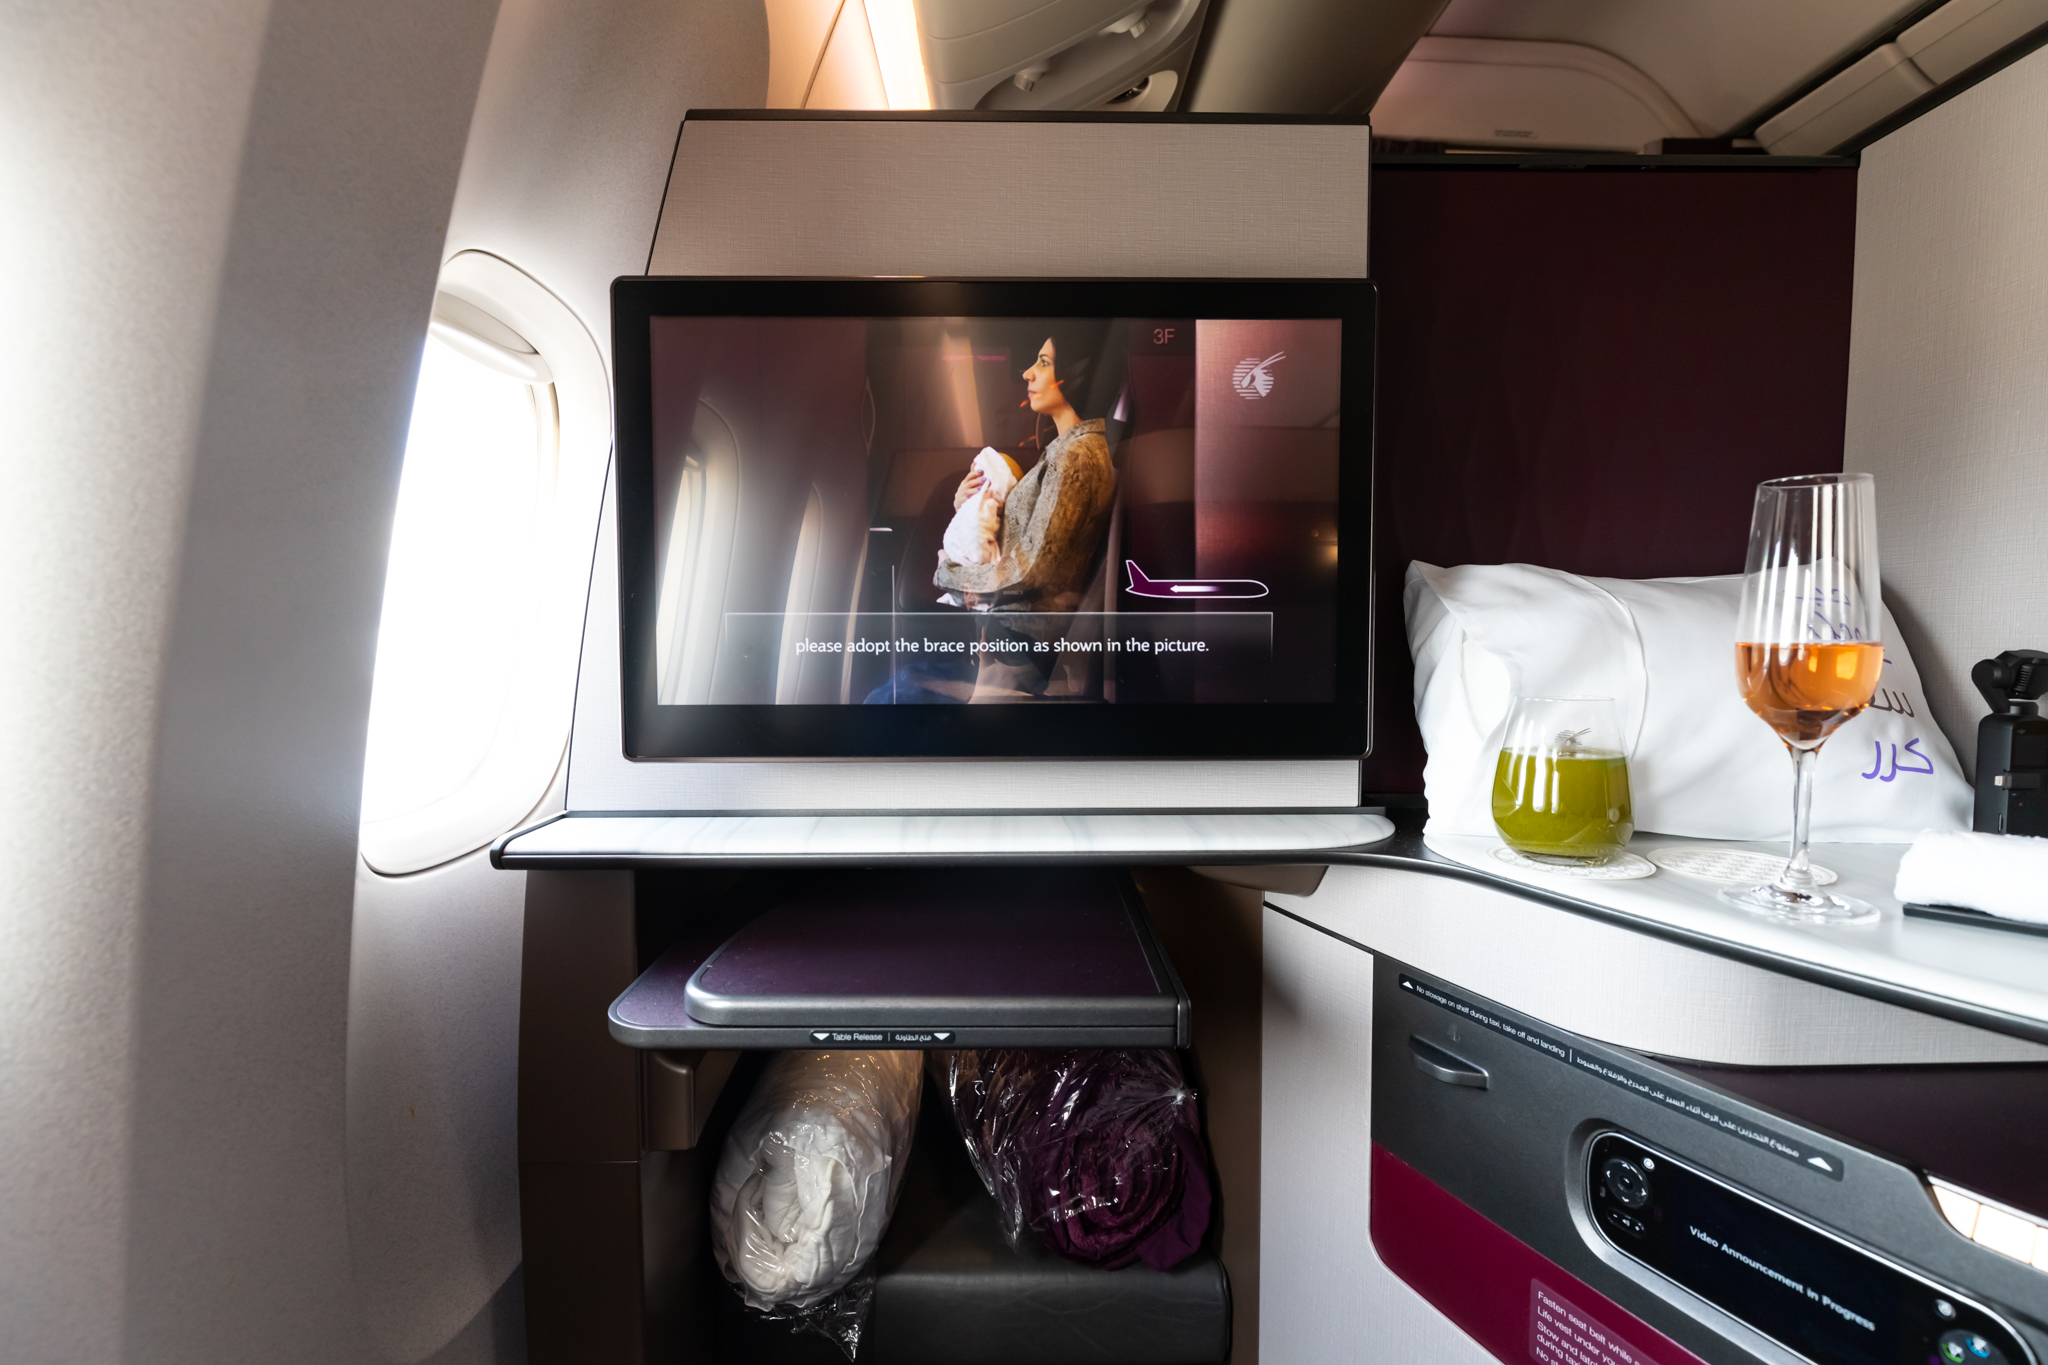 a tv on a shelf in an airplane